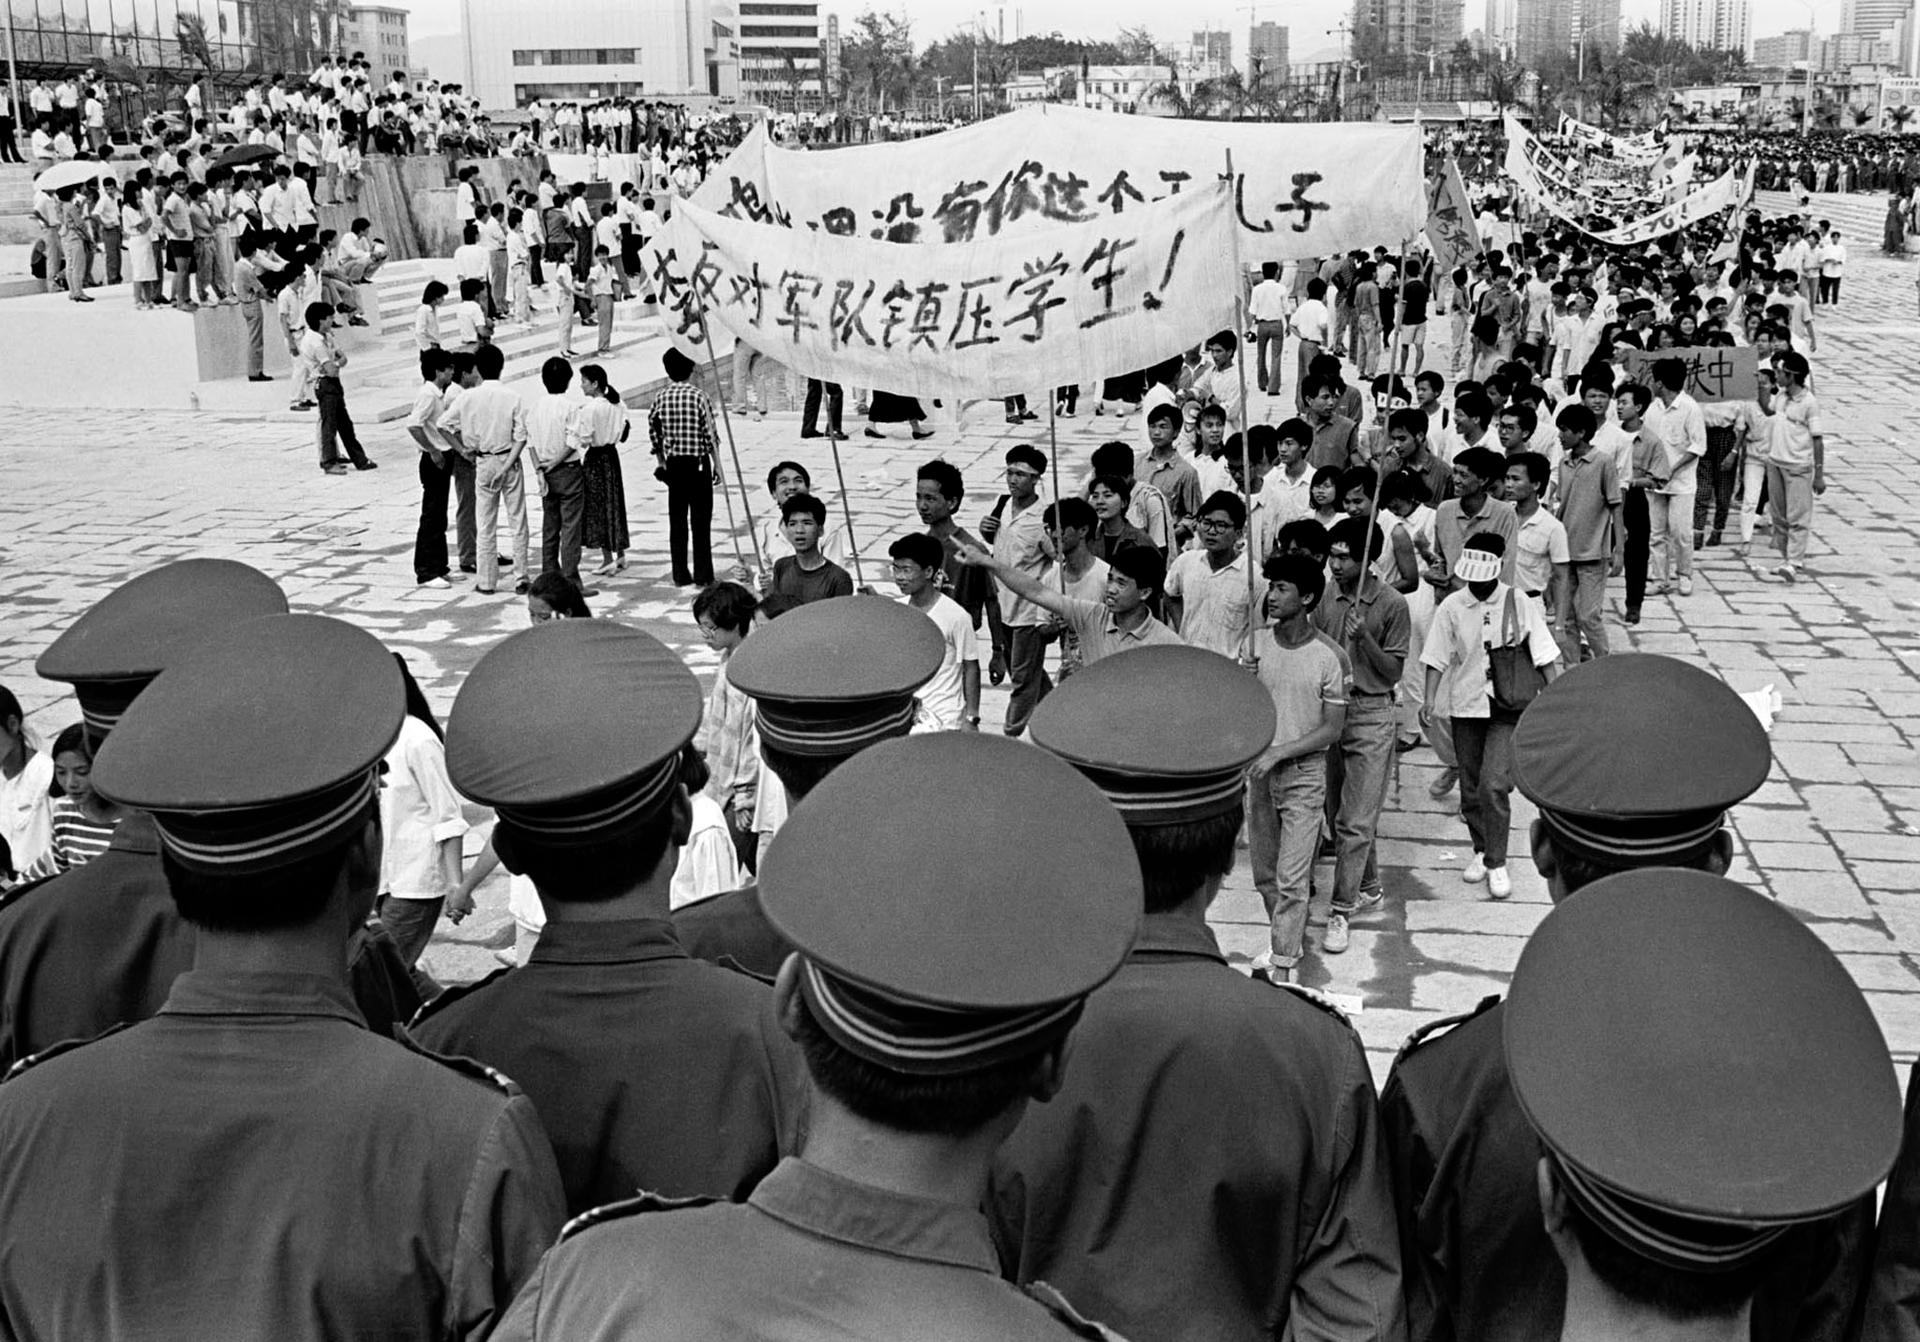 Chinese police monitor a march by tens of thousands of protesters in the special economic zone of Shenzhen in southern China on May 22, 1989. Hundreds of people were killed in Beijing on June 4, 1989 when Chinese troops crushed demonstrations which called